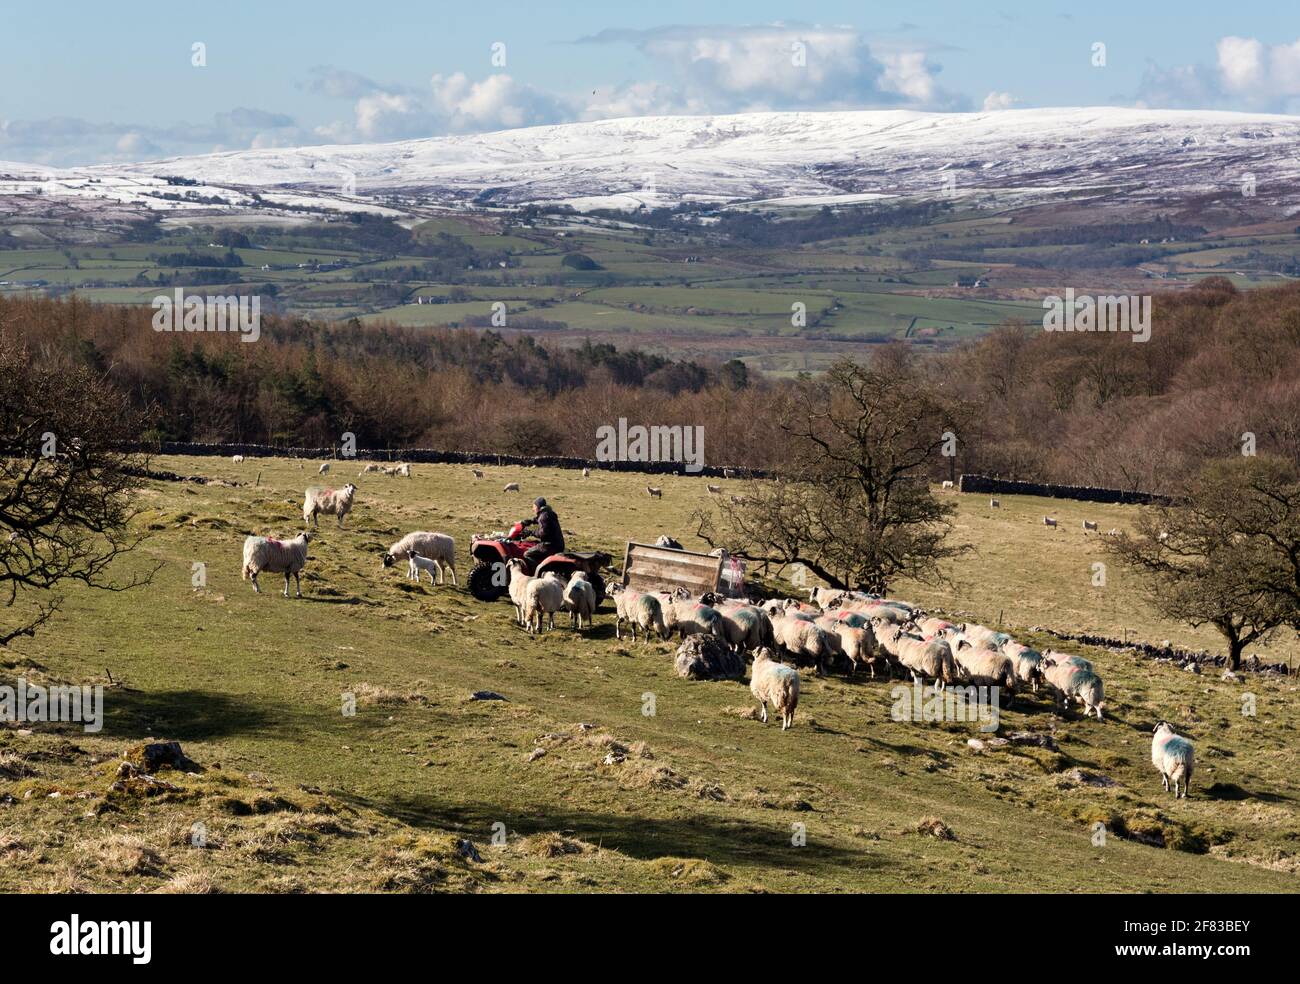 Springtime, but cold weather, Clapdale near Clapham in the Yorkshire Dales National Park. A farmer gathers his Swaledale sheep to take them down to lower land for lambing. On the horizon, overnight snow can be seen on the hills of The Forest Of Bowland. Credit: John Bentley/Alamy Live News Stock Photo